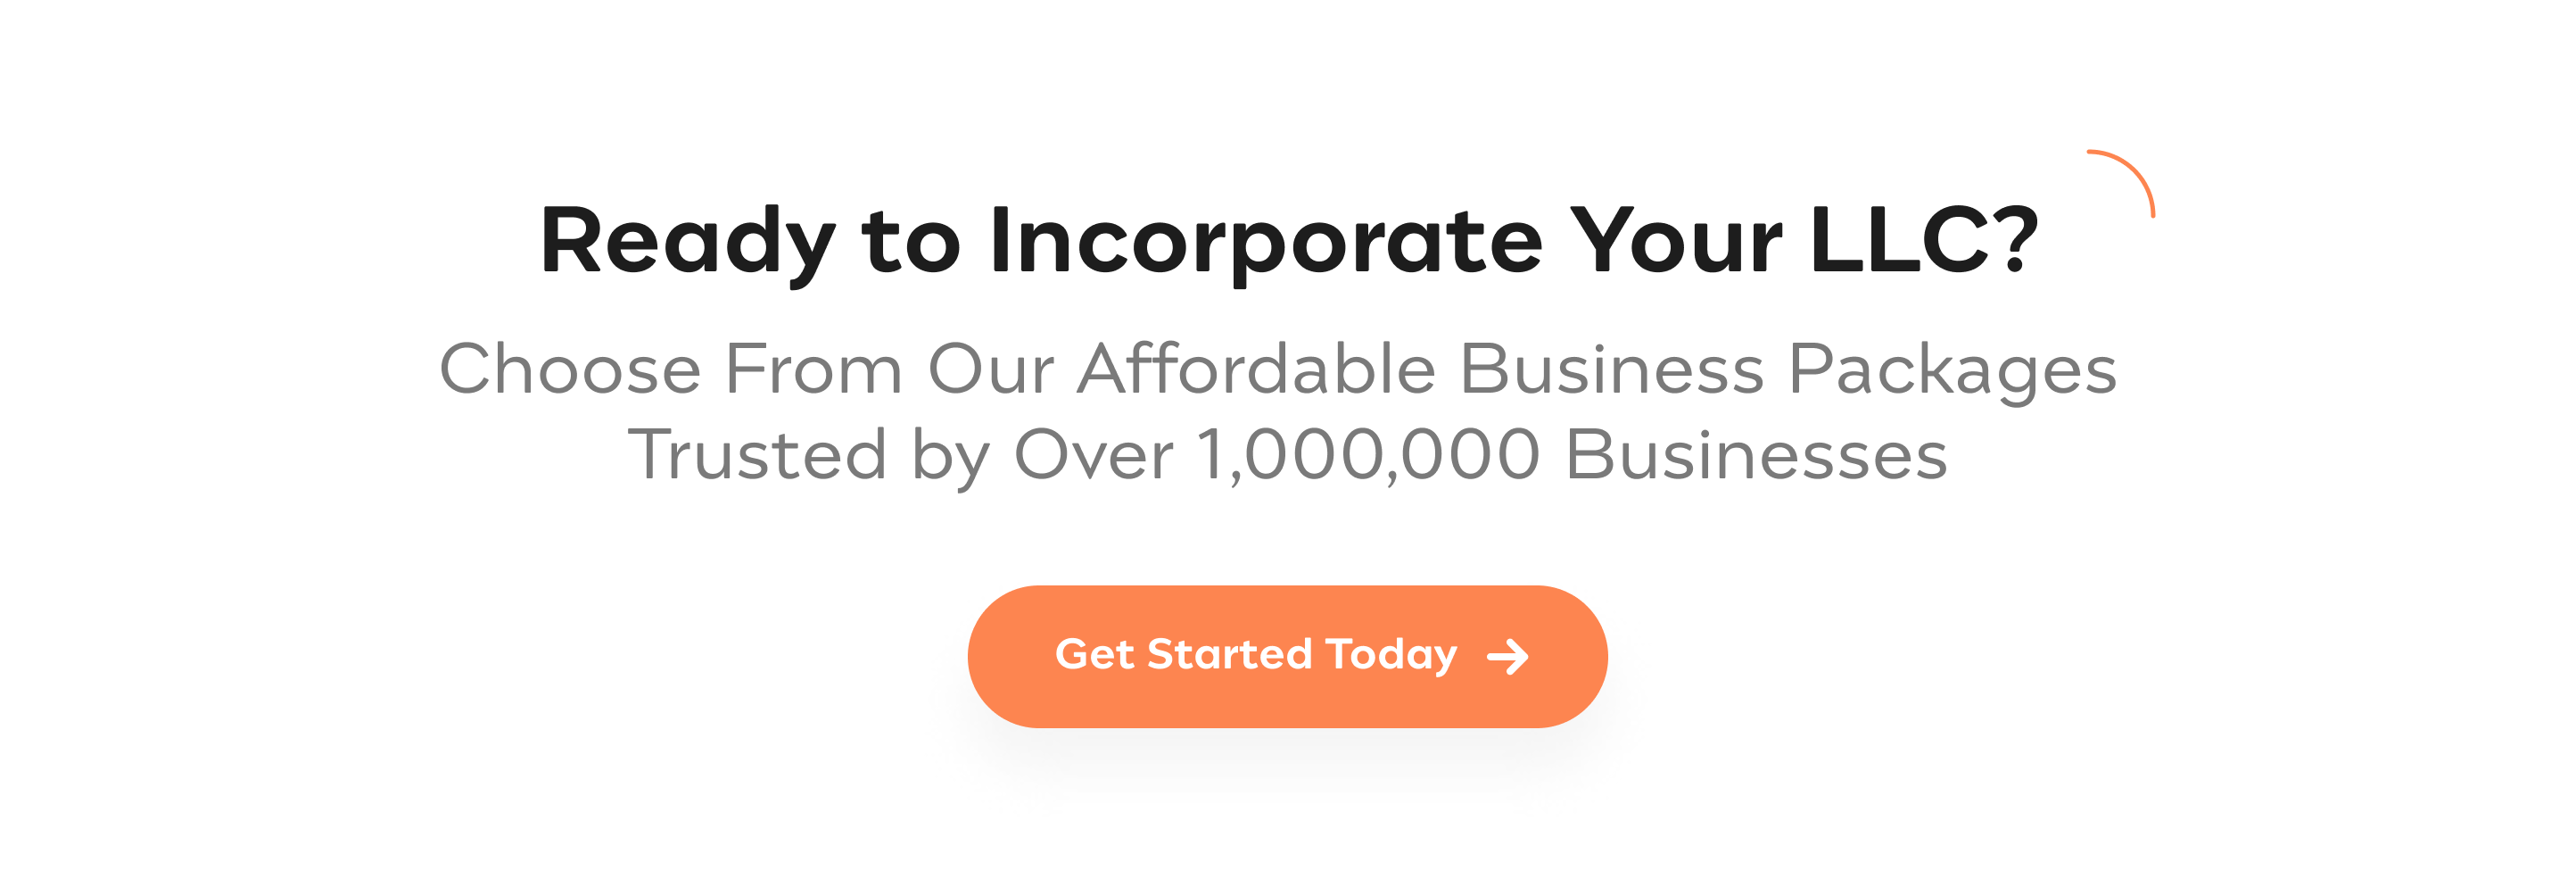 Ready to Incorporate Your LLC?  Choose From Our Affordable Business Packages Trusted by Over 250,000  Businesses. Get started today